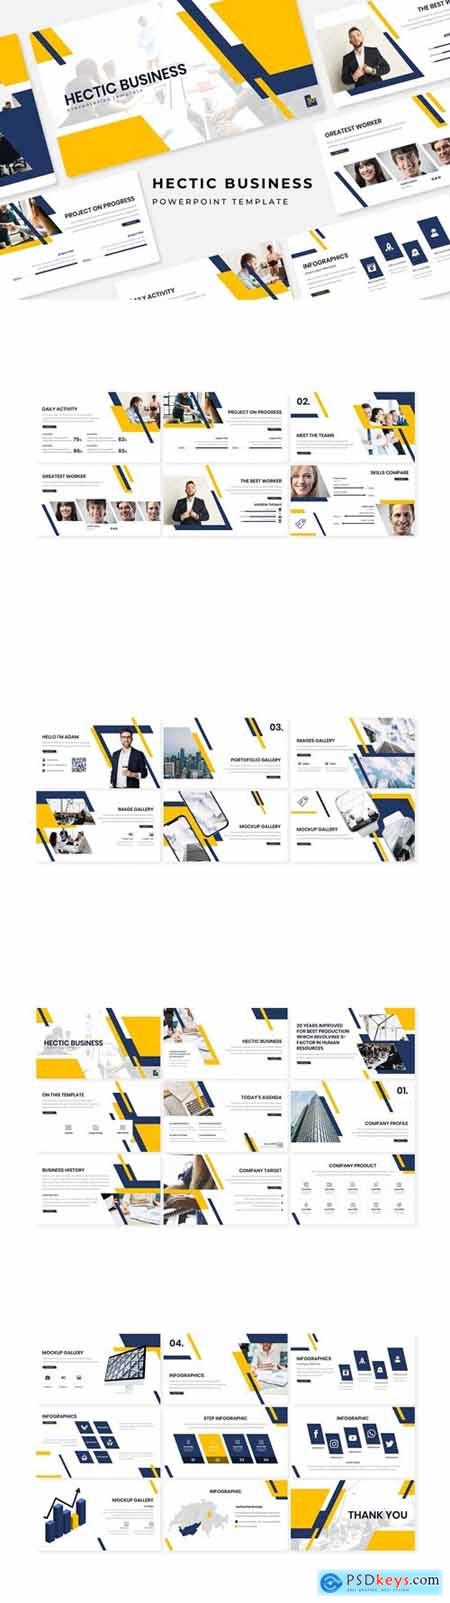 Hectic Business Powerpoint, Keynote and Google Slides Templates